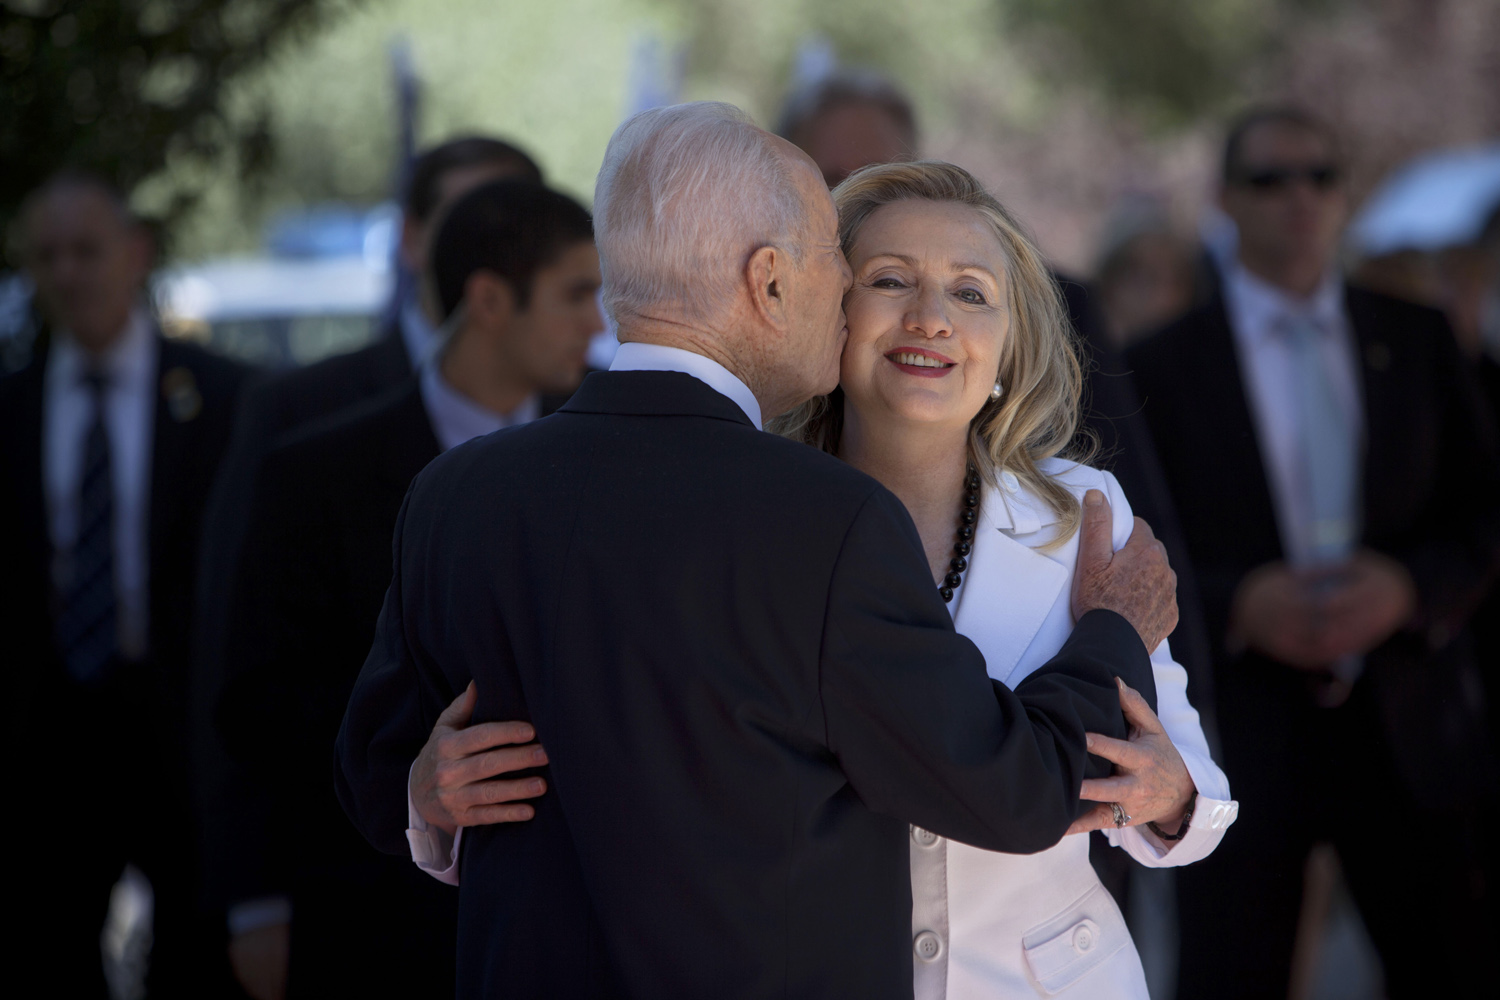 July 16, 2012. Israel's president Shimon Peres, left, welcomes U.S. Secretary of State Hillary Rodham Clinton in Jerusalem.